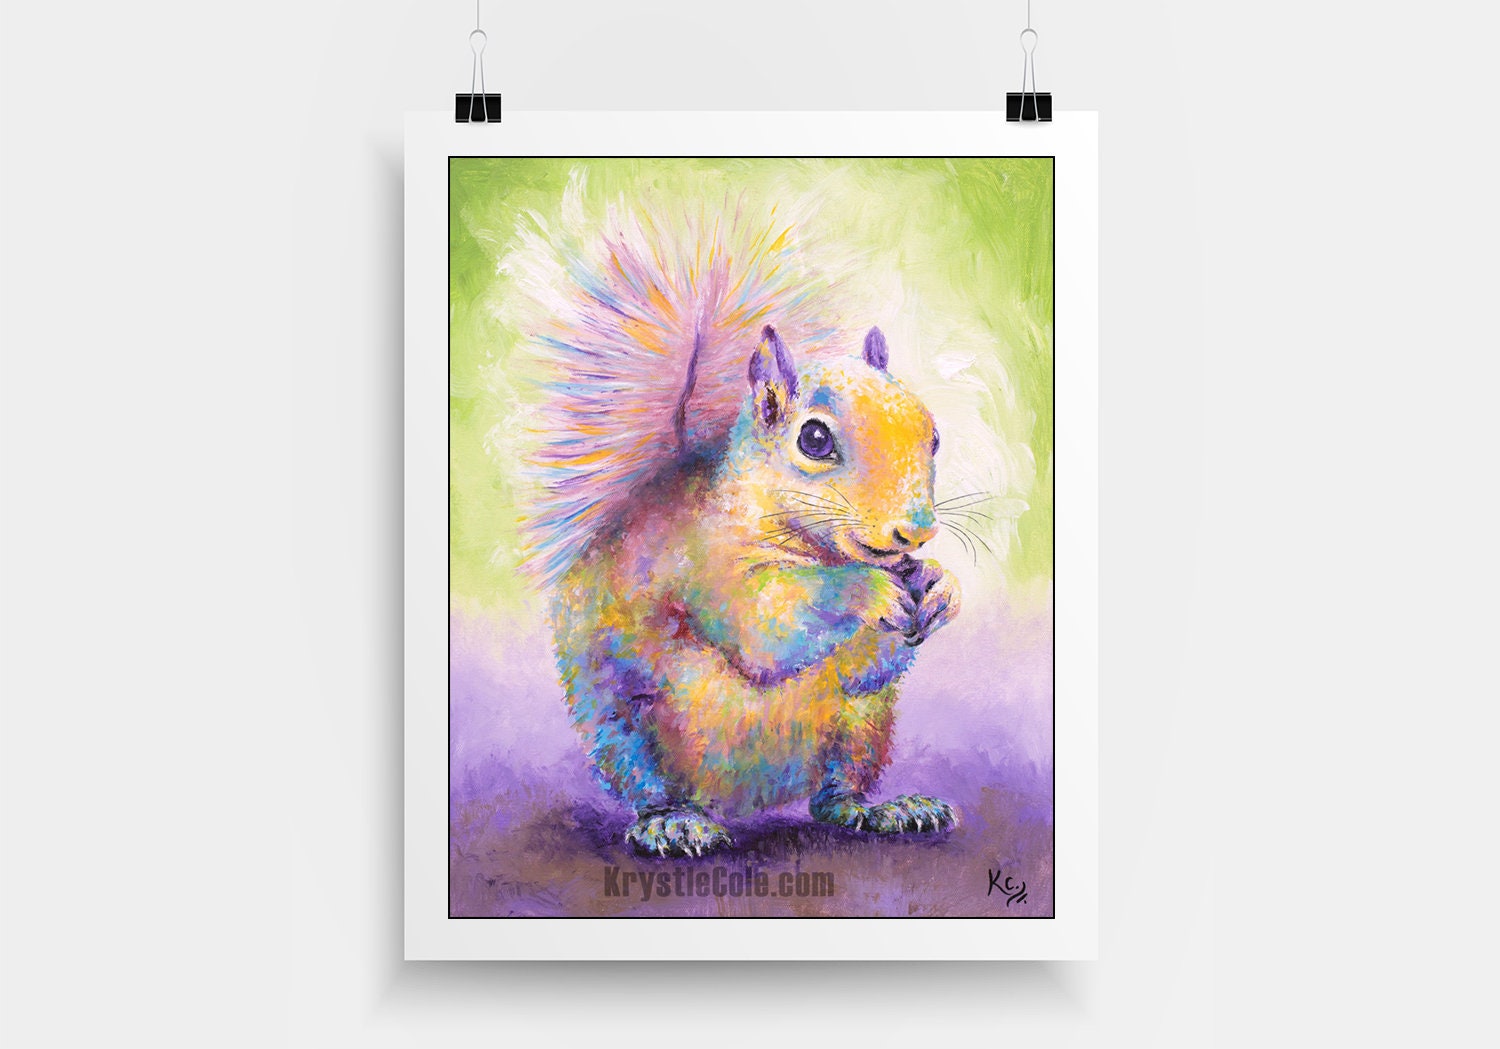 Squirrel Art Print on CANVAS or PAPER - Fun for Wall Decor or Gifts. Squirrel Painting by Krystle Cole